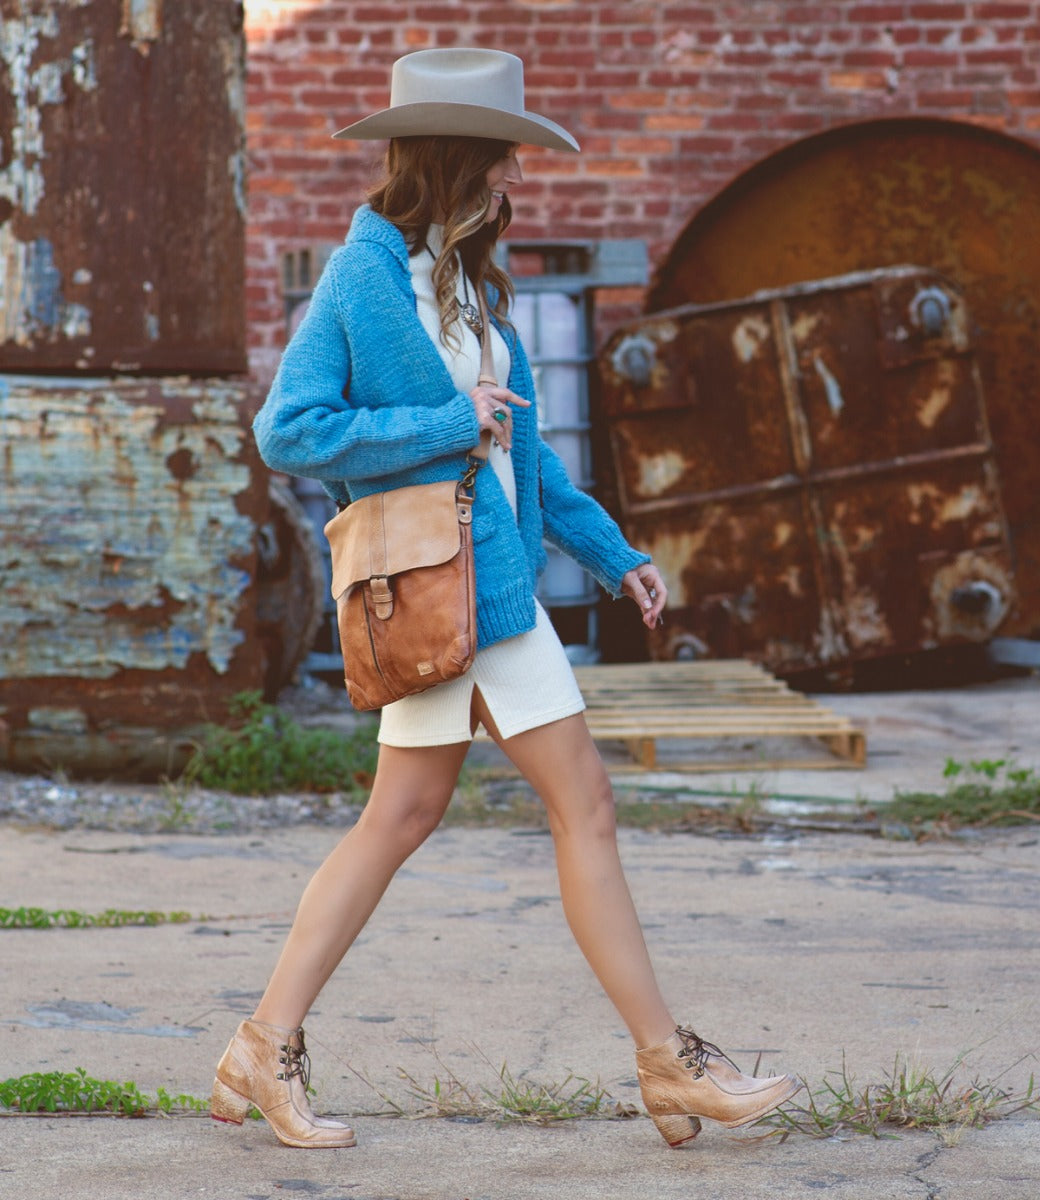 A woman wearing hat, blue cardigan, and Jack bag by Bed Stu while walking down a street.